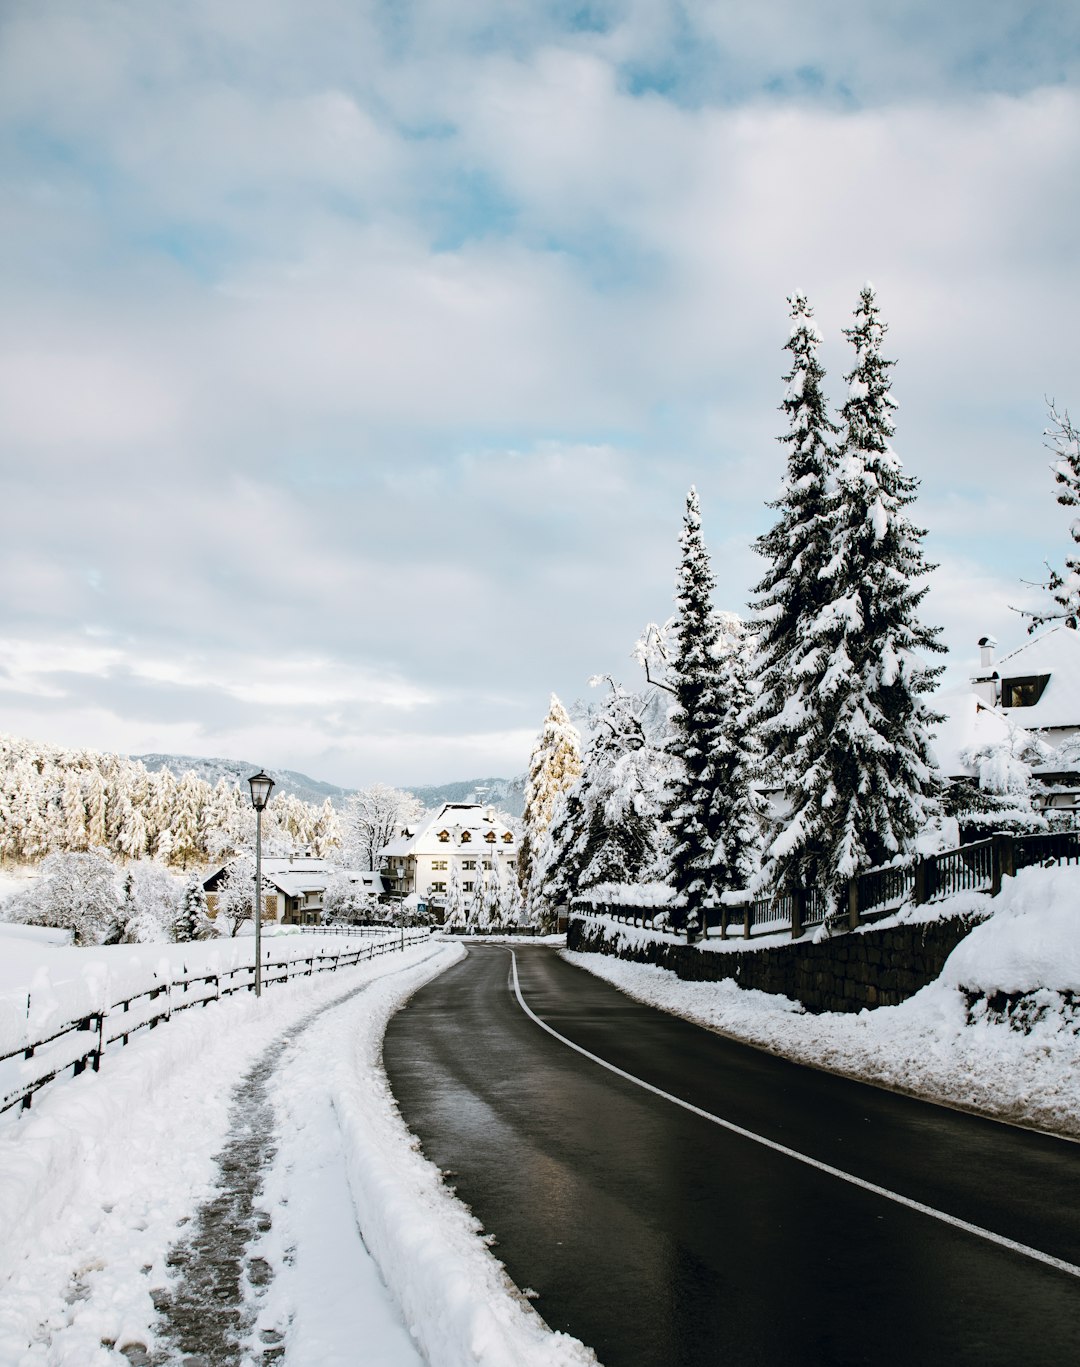 snow covered road near trees and houses under white clouds and blue sky during daytime